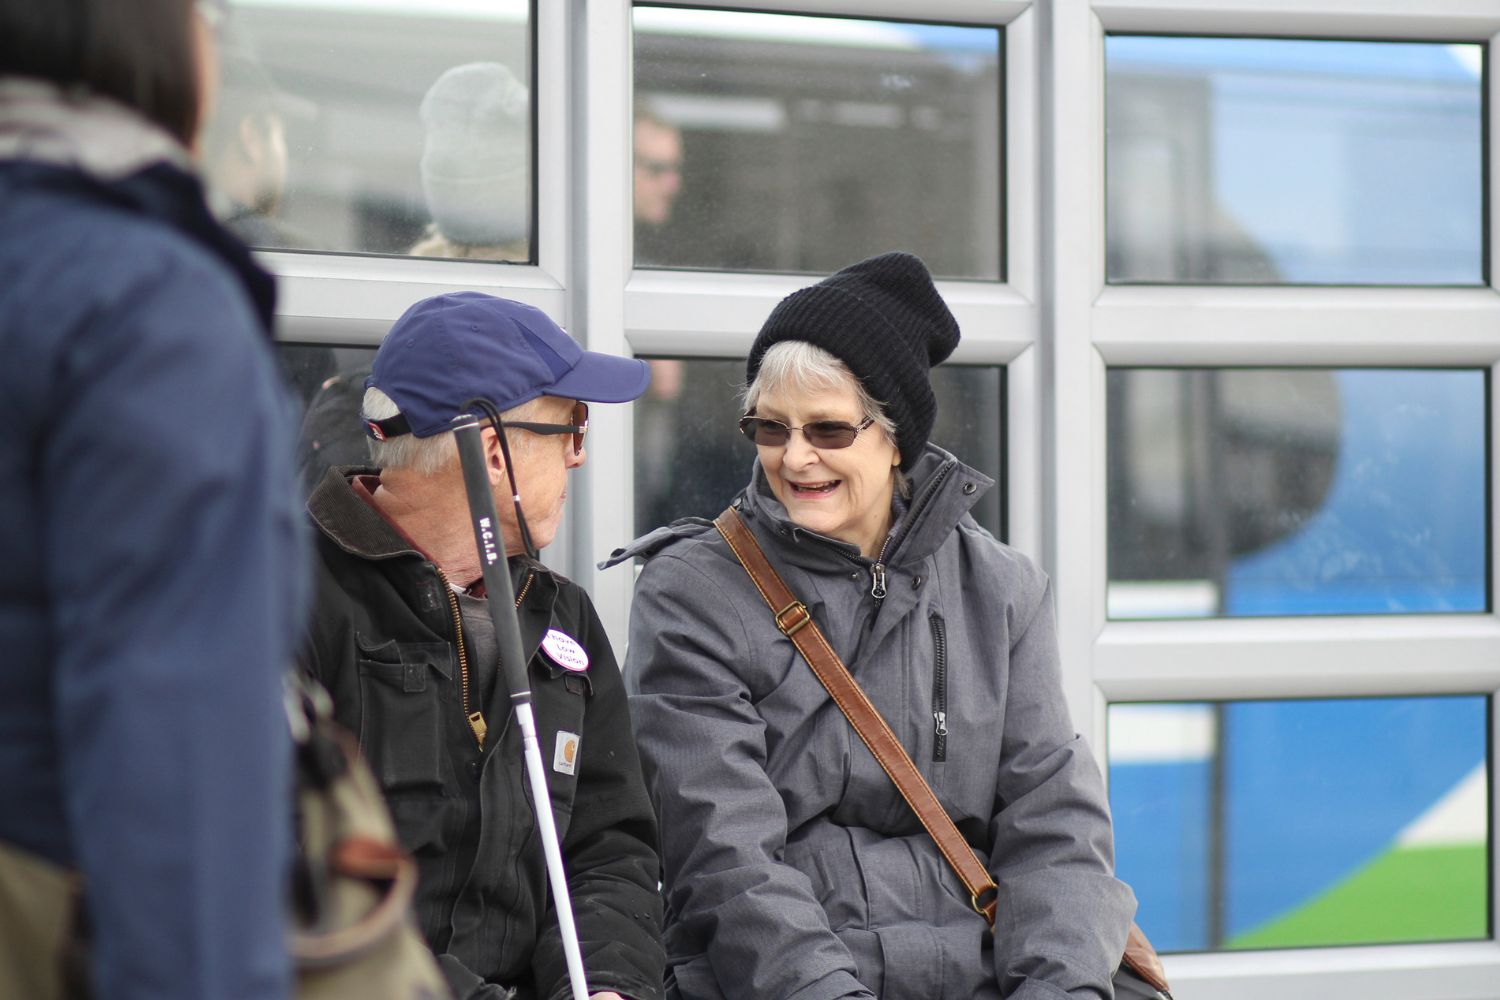 Older adult riders smile while waiting for their bus.